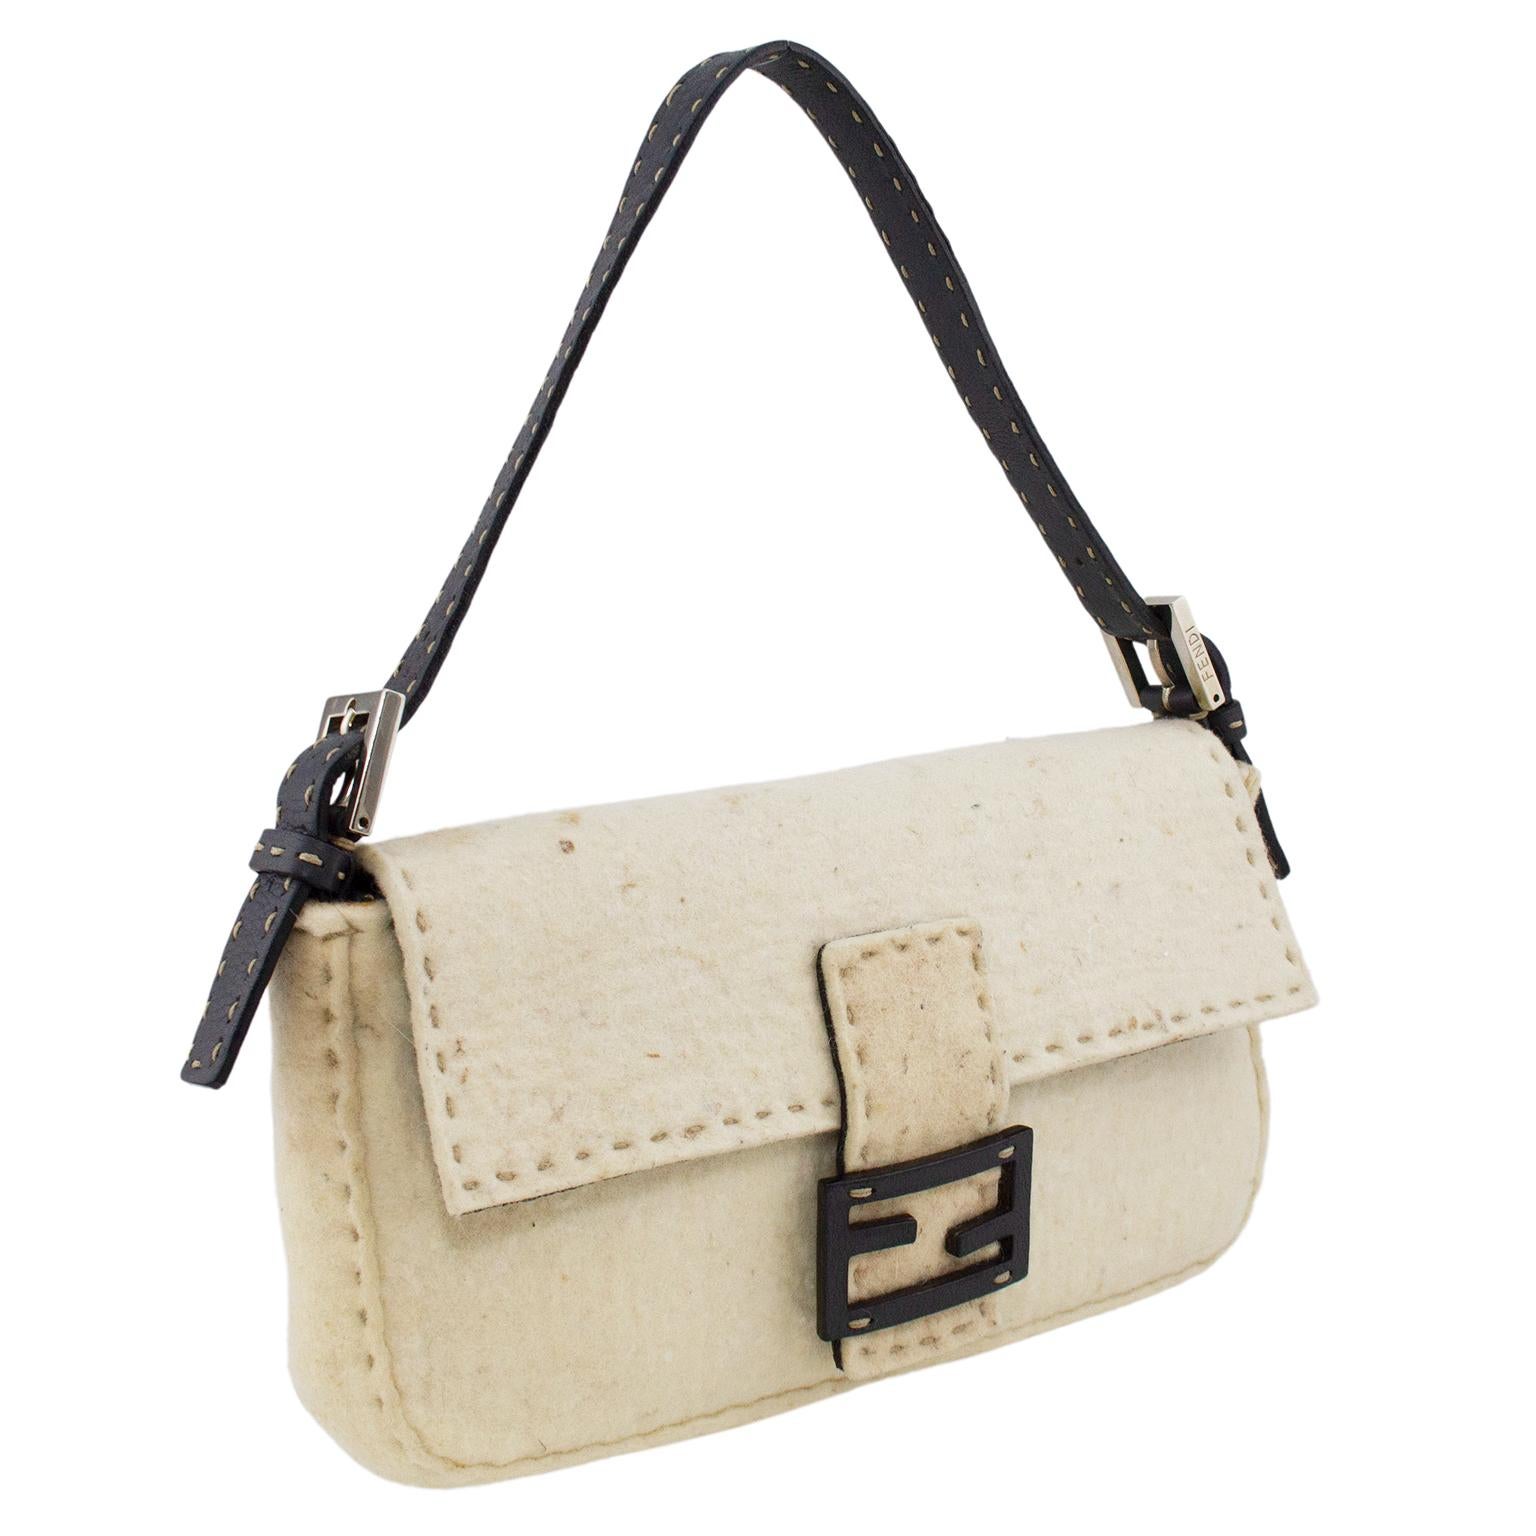 1990s Fendi cream felted wool baguette. Oatmeal coloured top stitching, dark brown leather strap with matching oatmeal top stitching and silver buckles and brown leather interlocking Fendi F logo at closure. Beige suede interior with single zippered